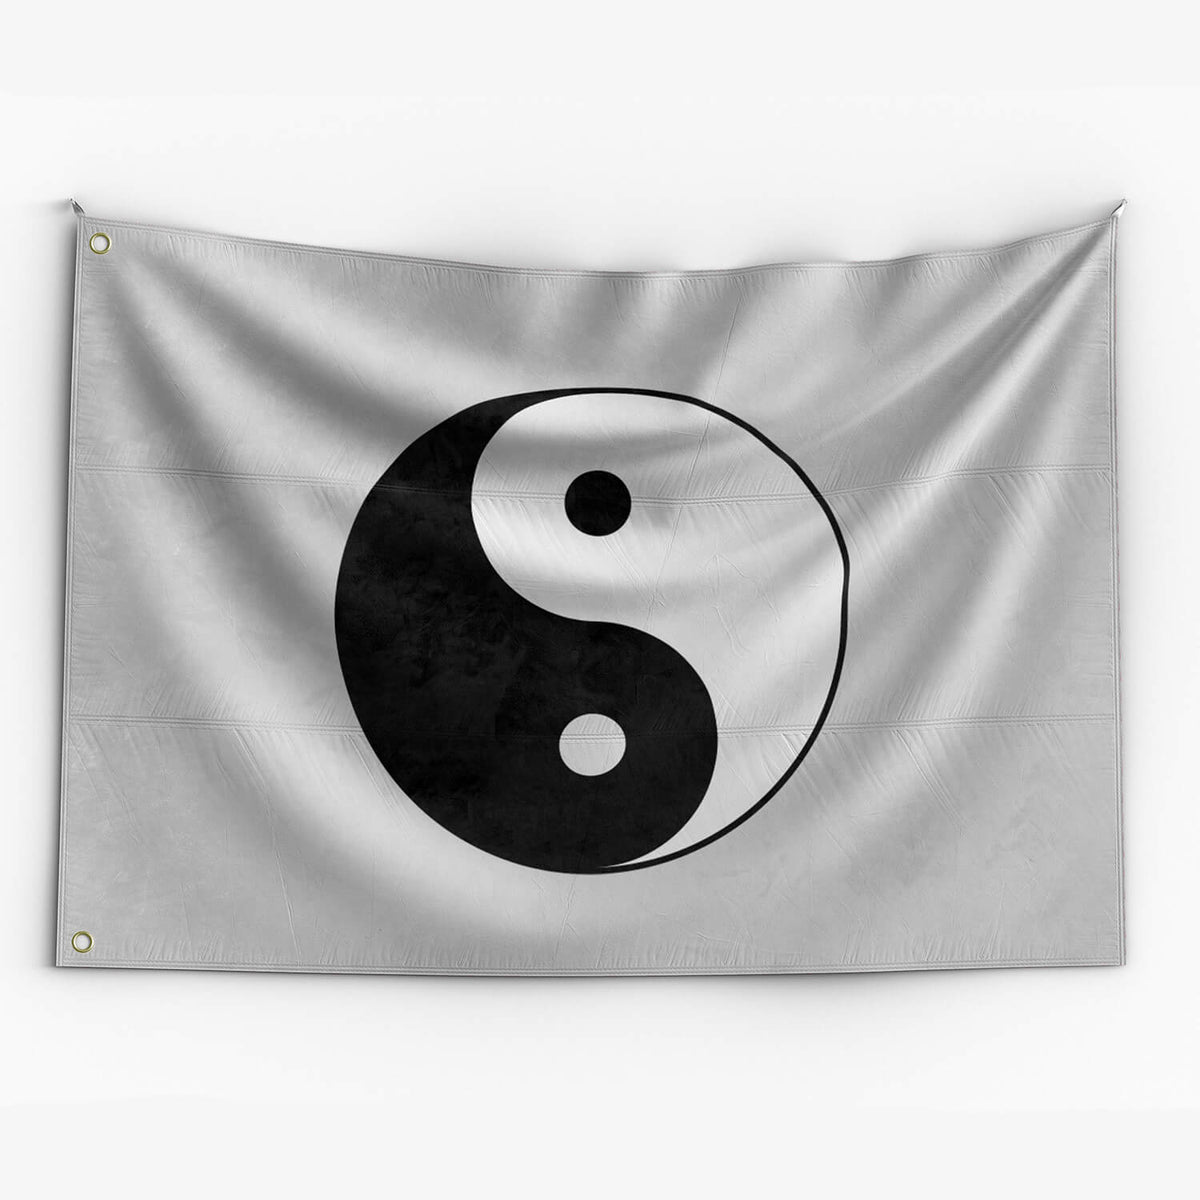  Yin Yang Flag Combination of America and Chad Face